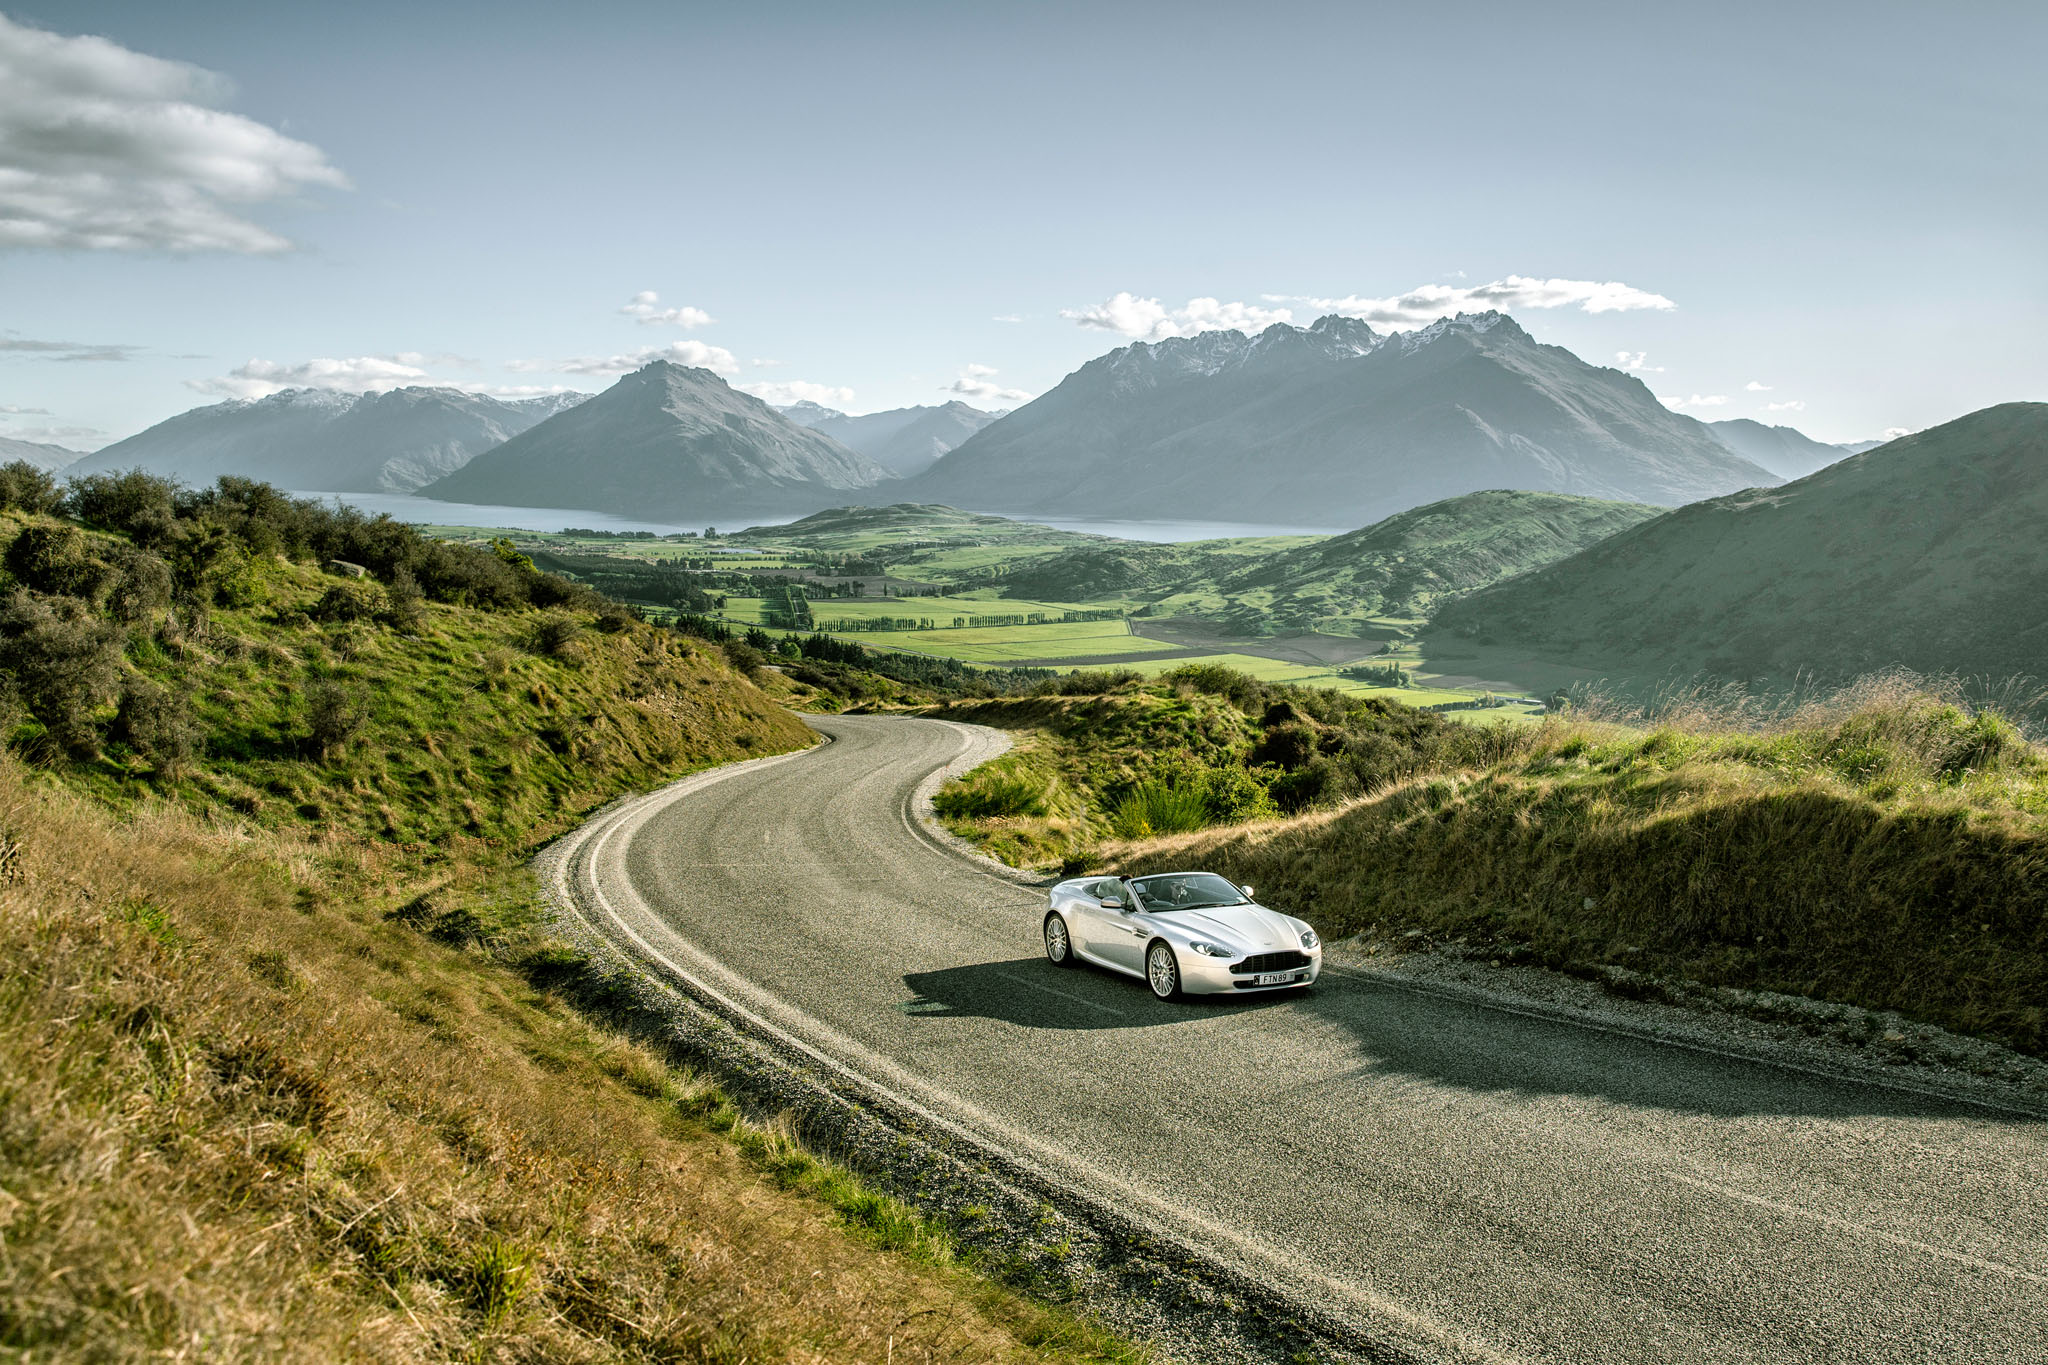 Queenstown Commercial Photography Aston Martin